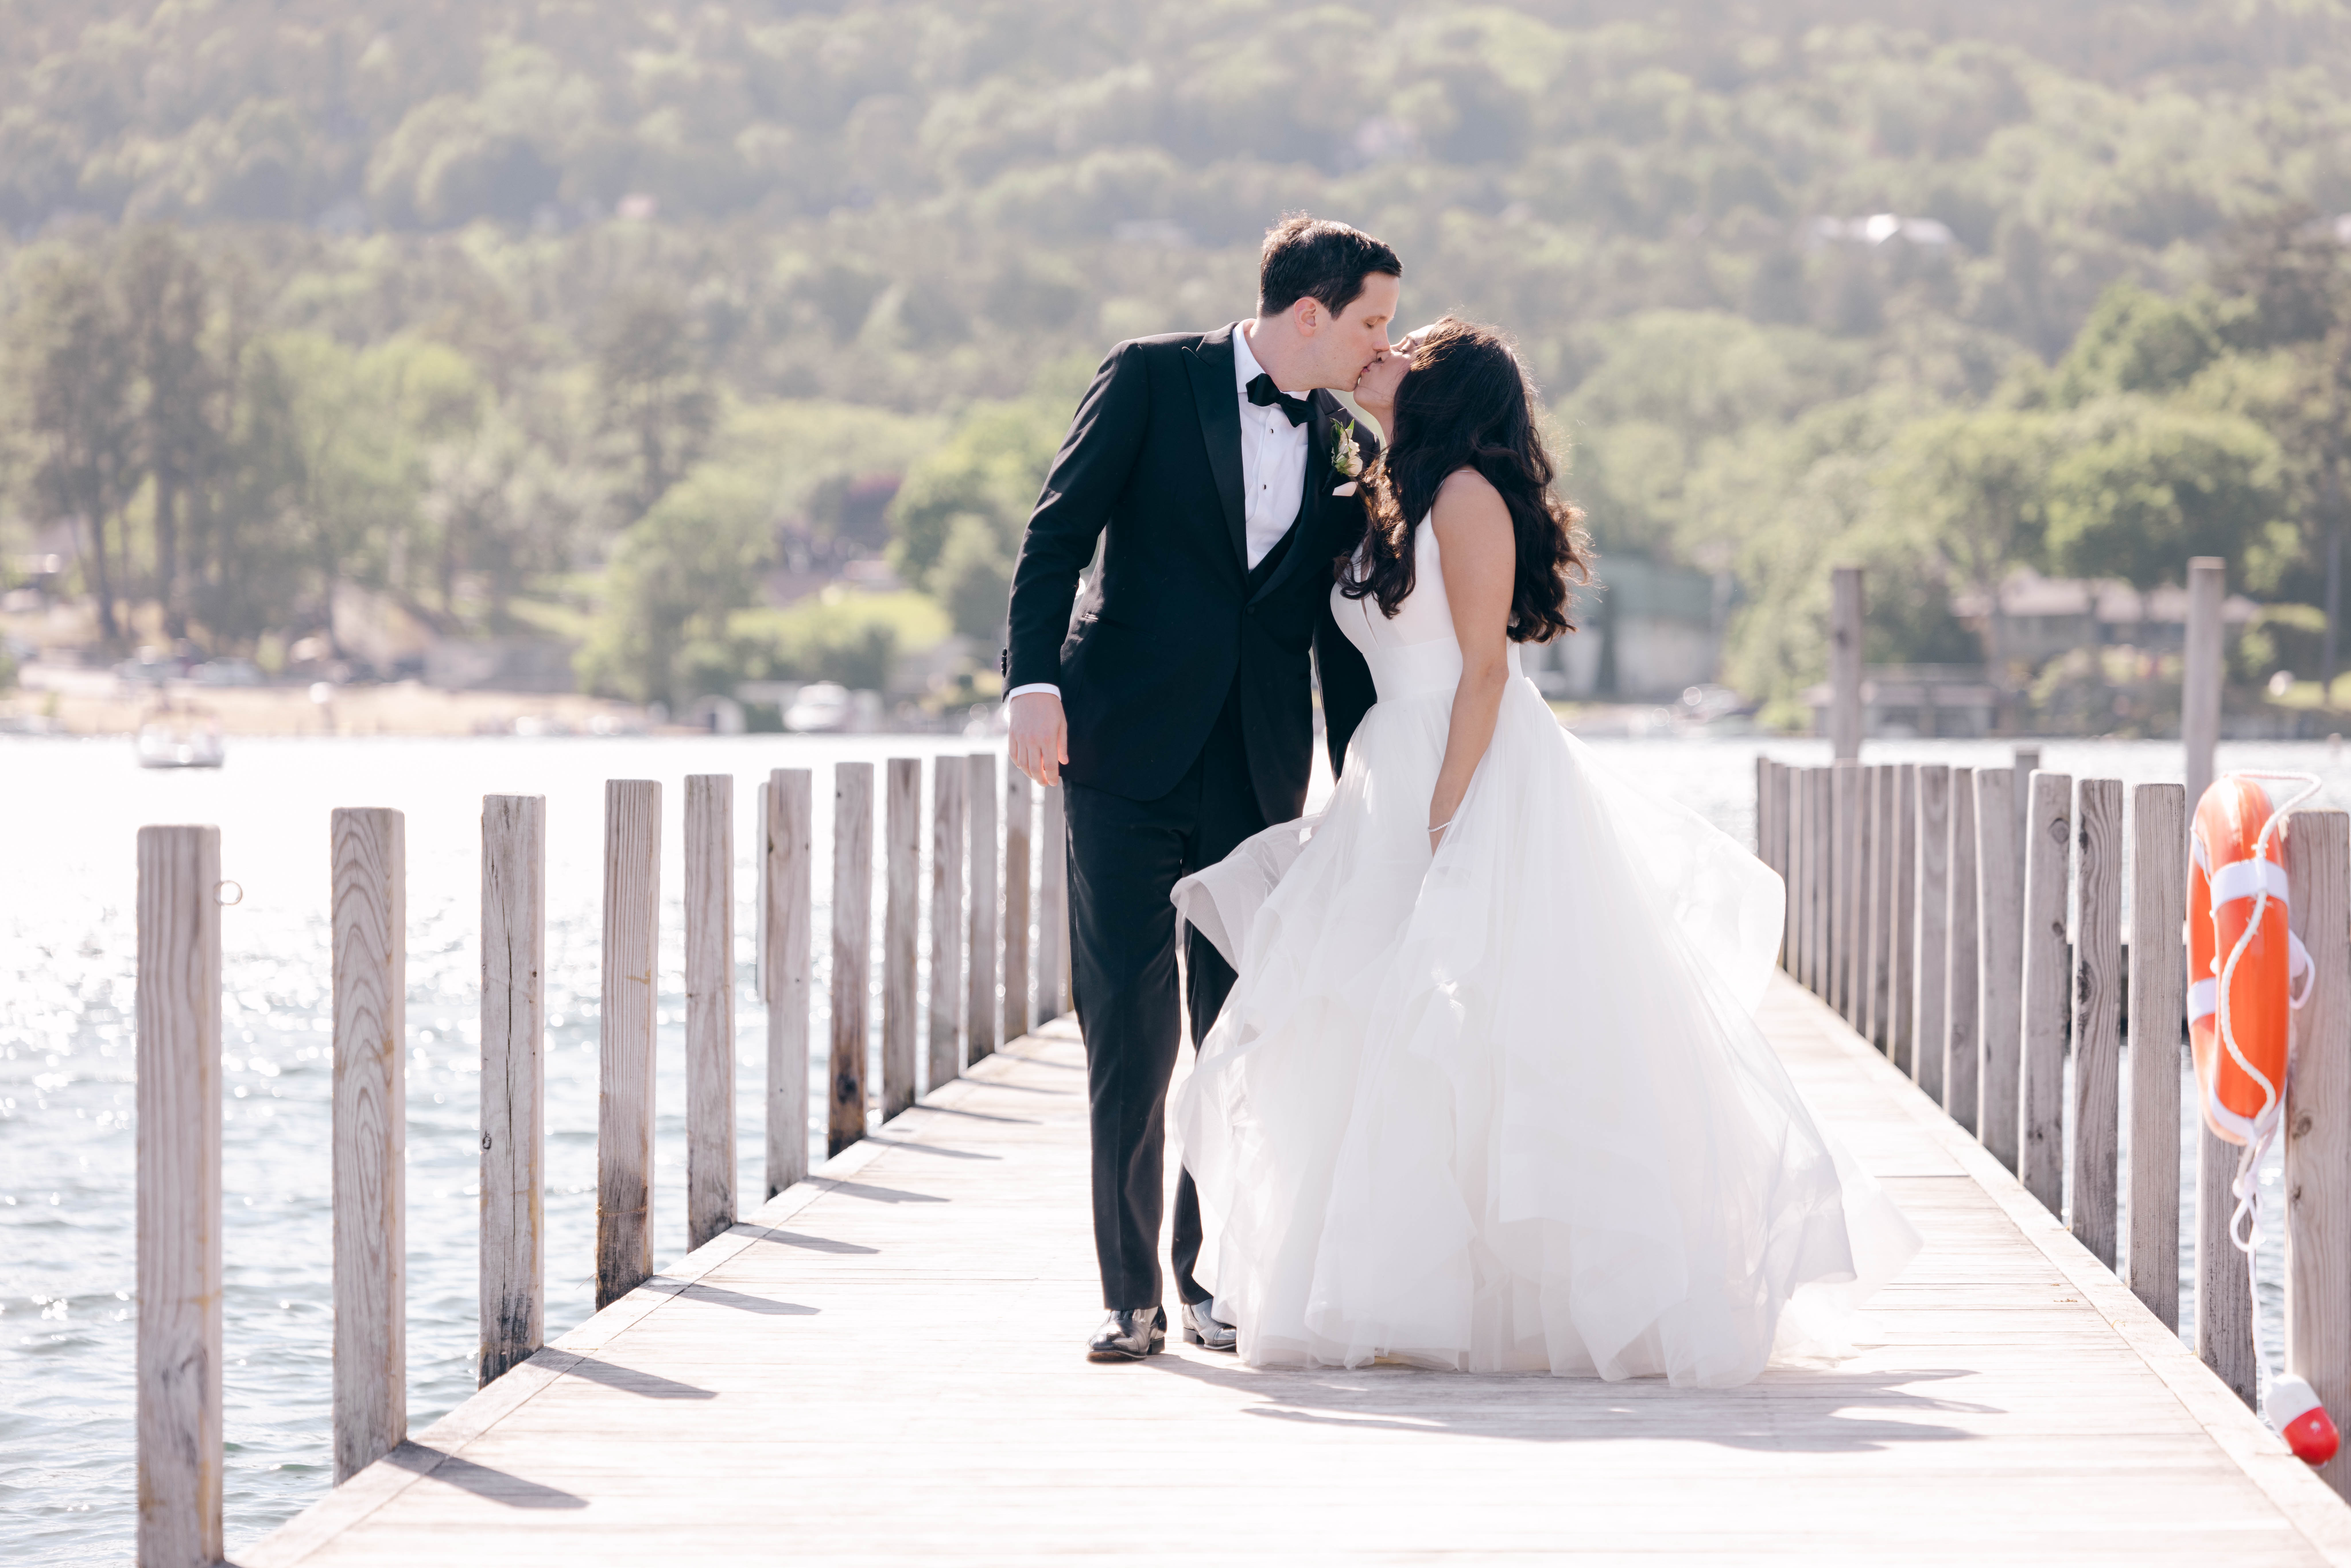 Best kisses of 2022 nominees include this kiss of the bride and groom on a dock at the Sagamore on Lake George